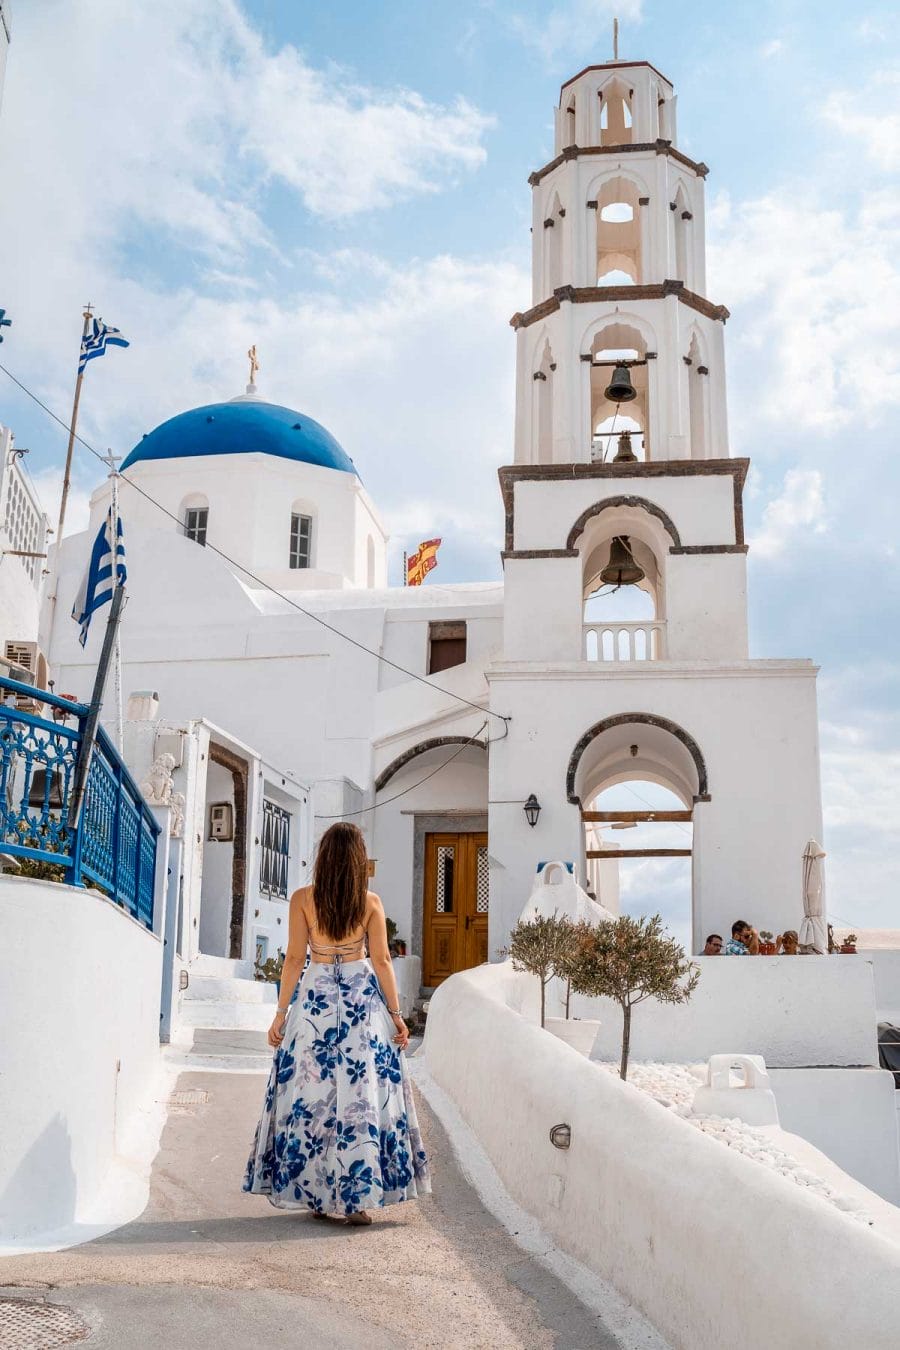 Girl in a blue floral dress standing in front of a church in Pyrgos, Santorini